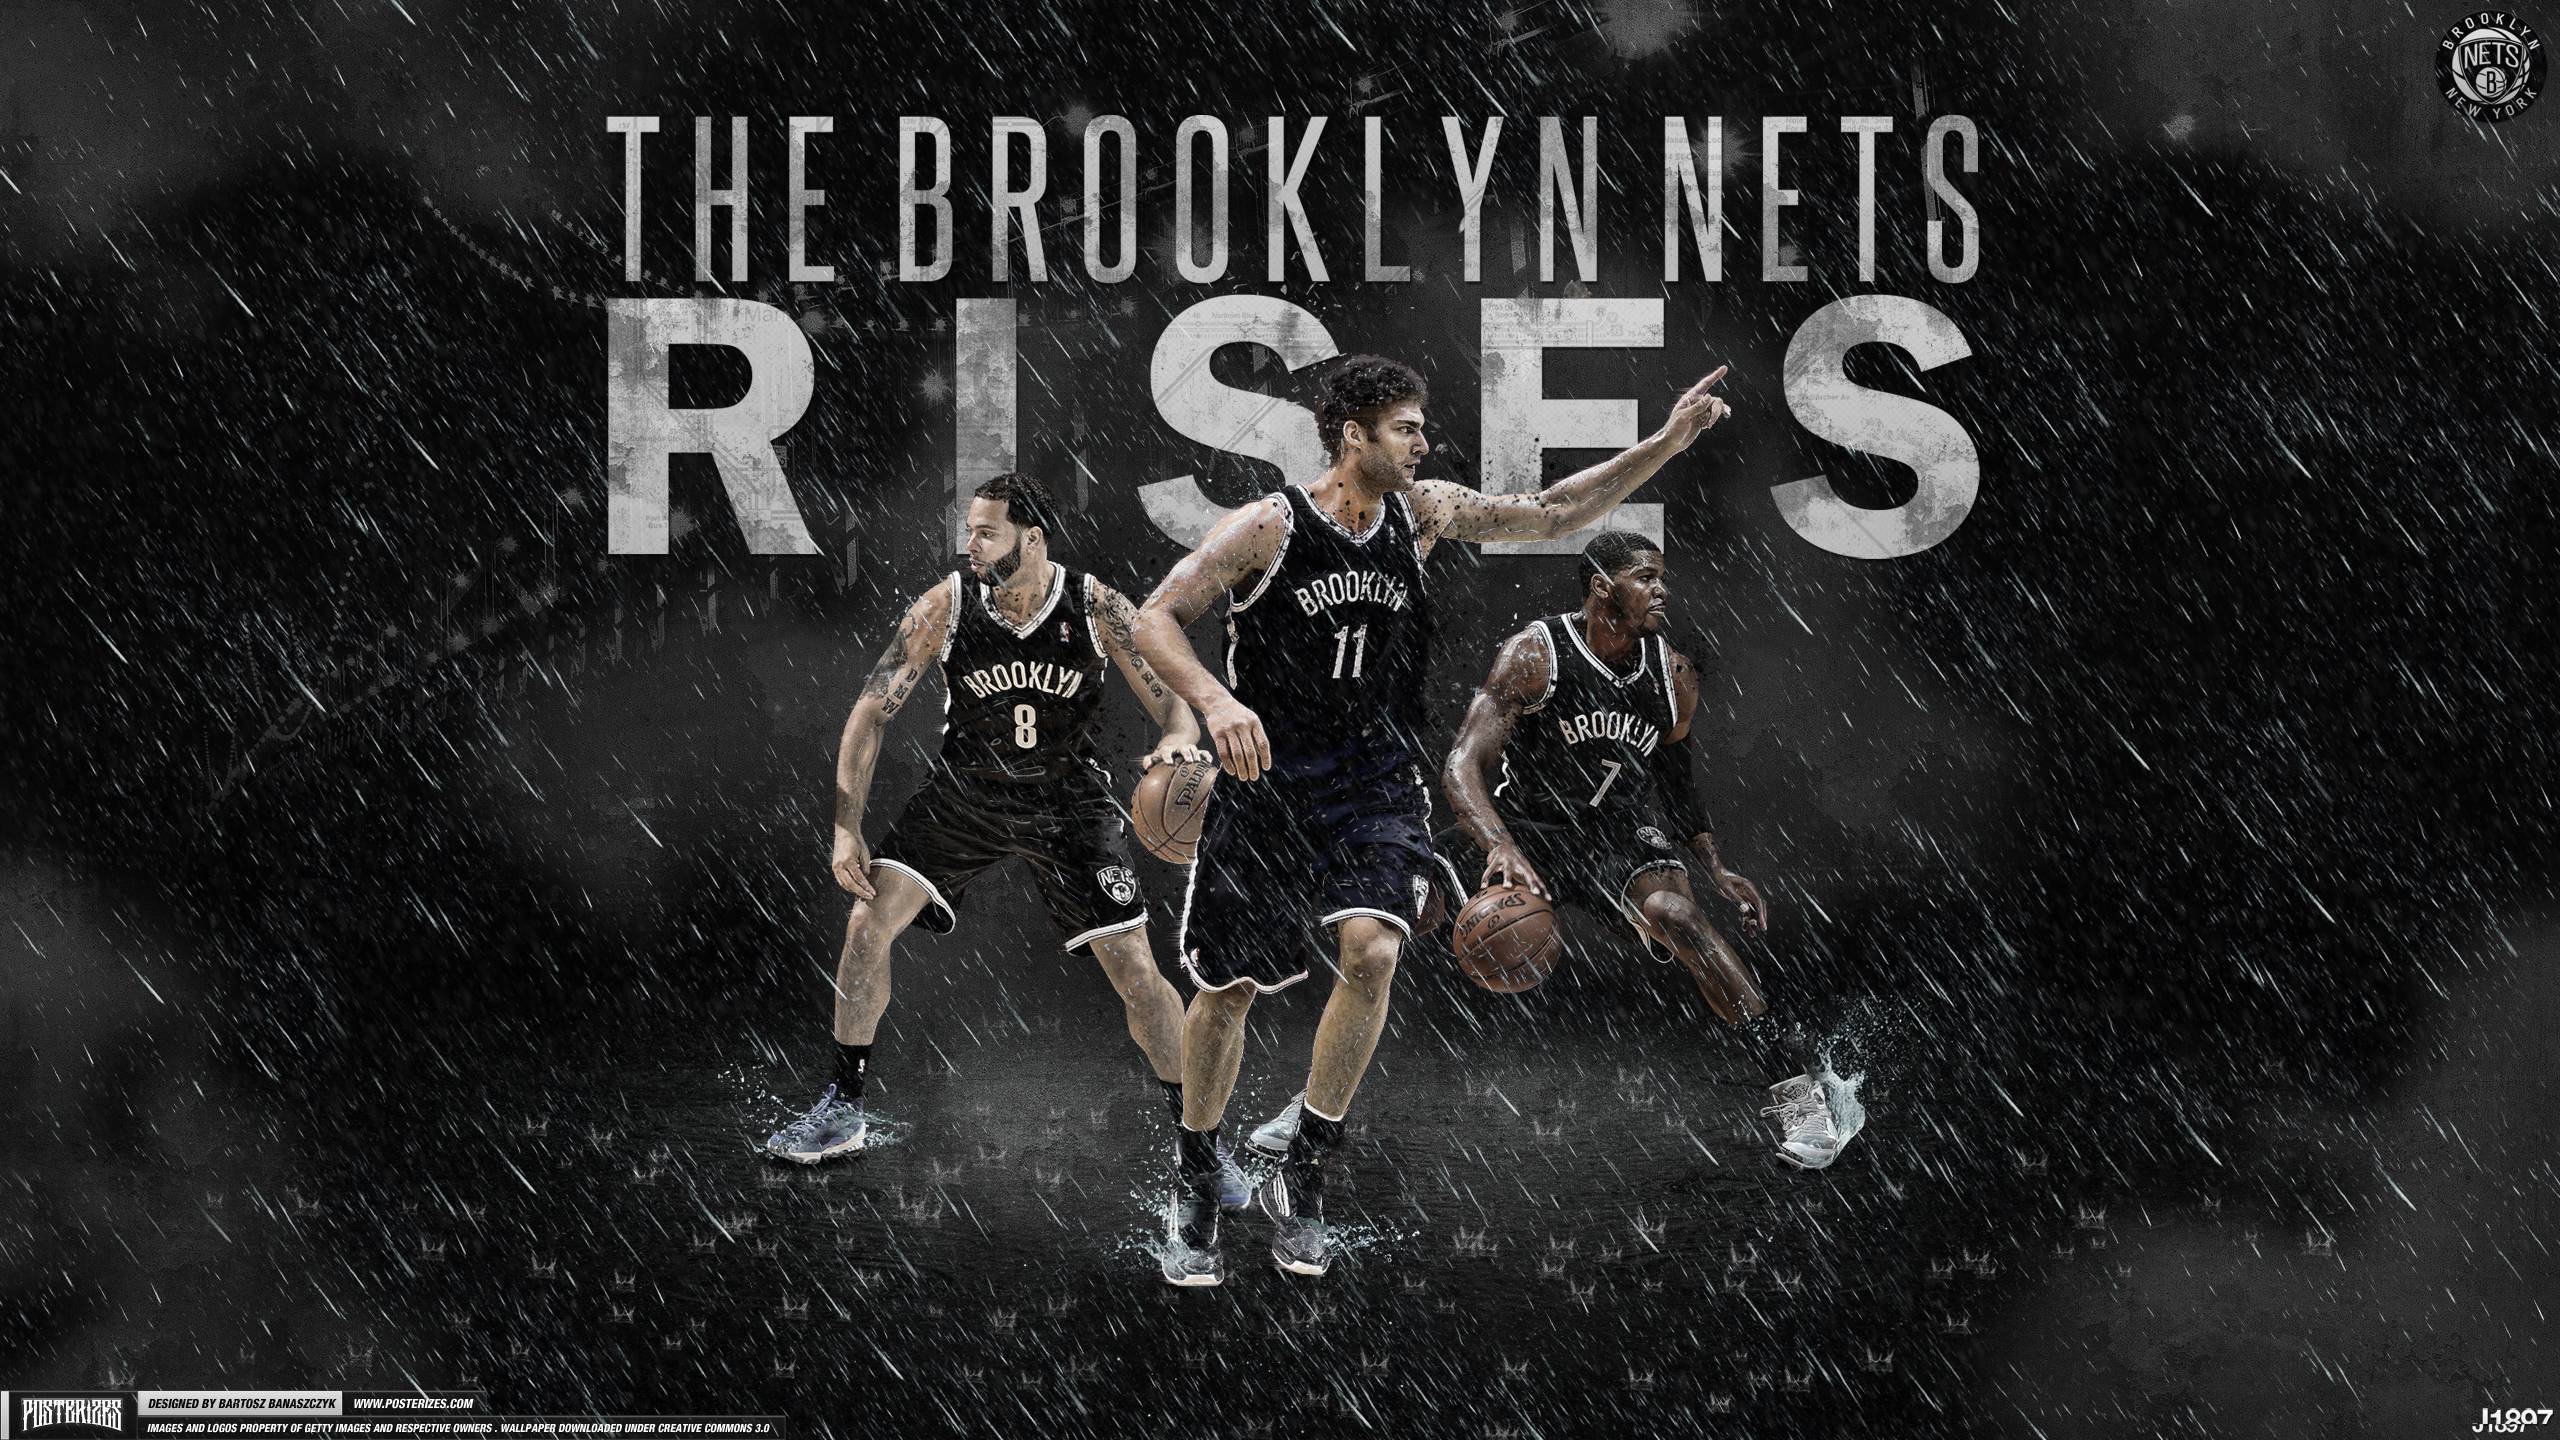 Nets Wallpapers